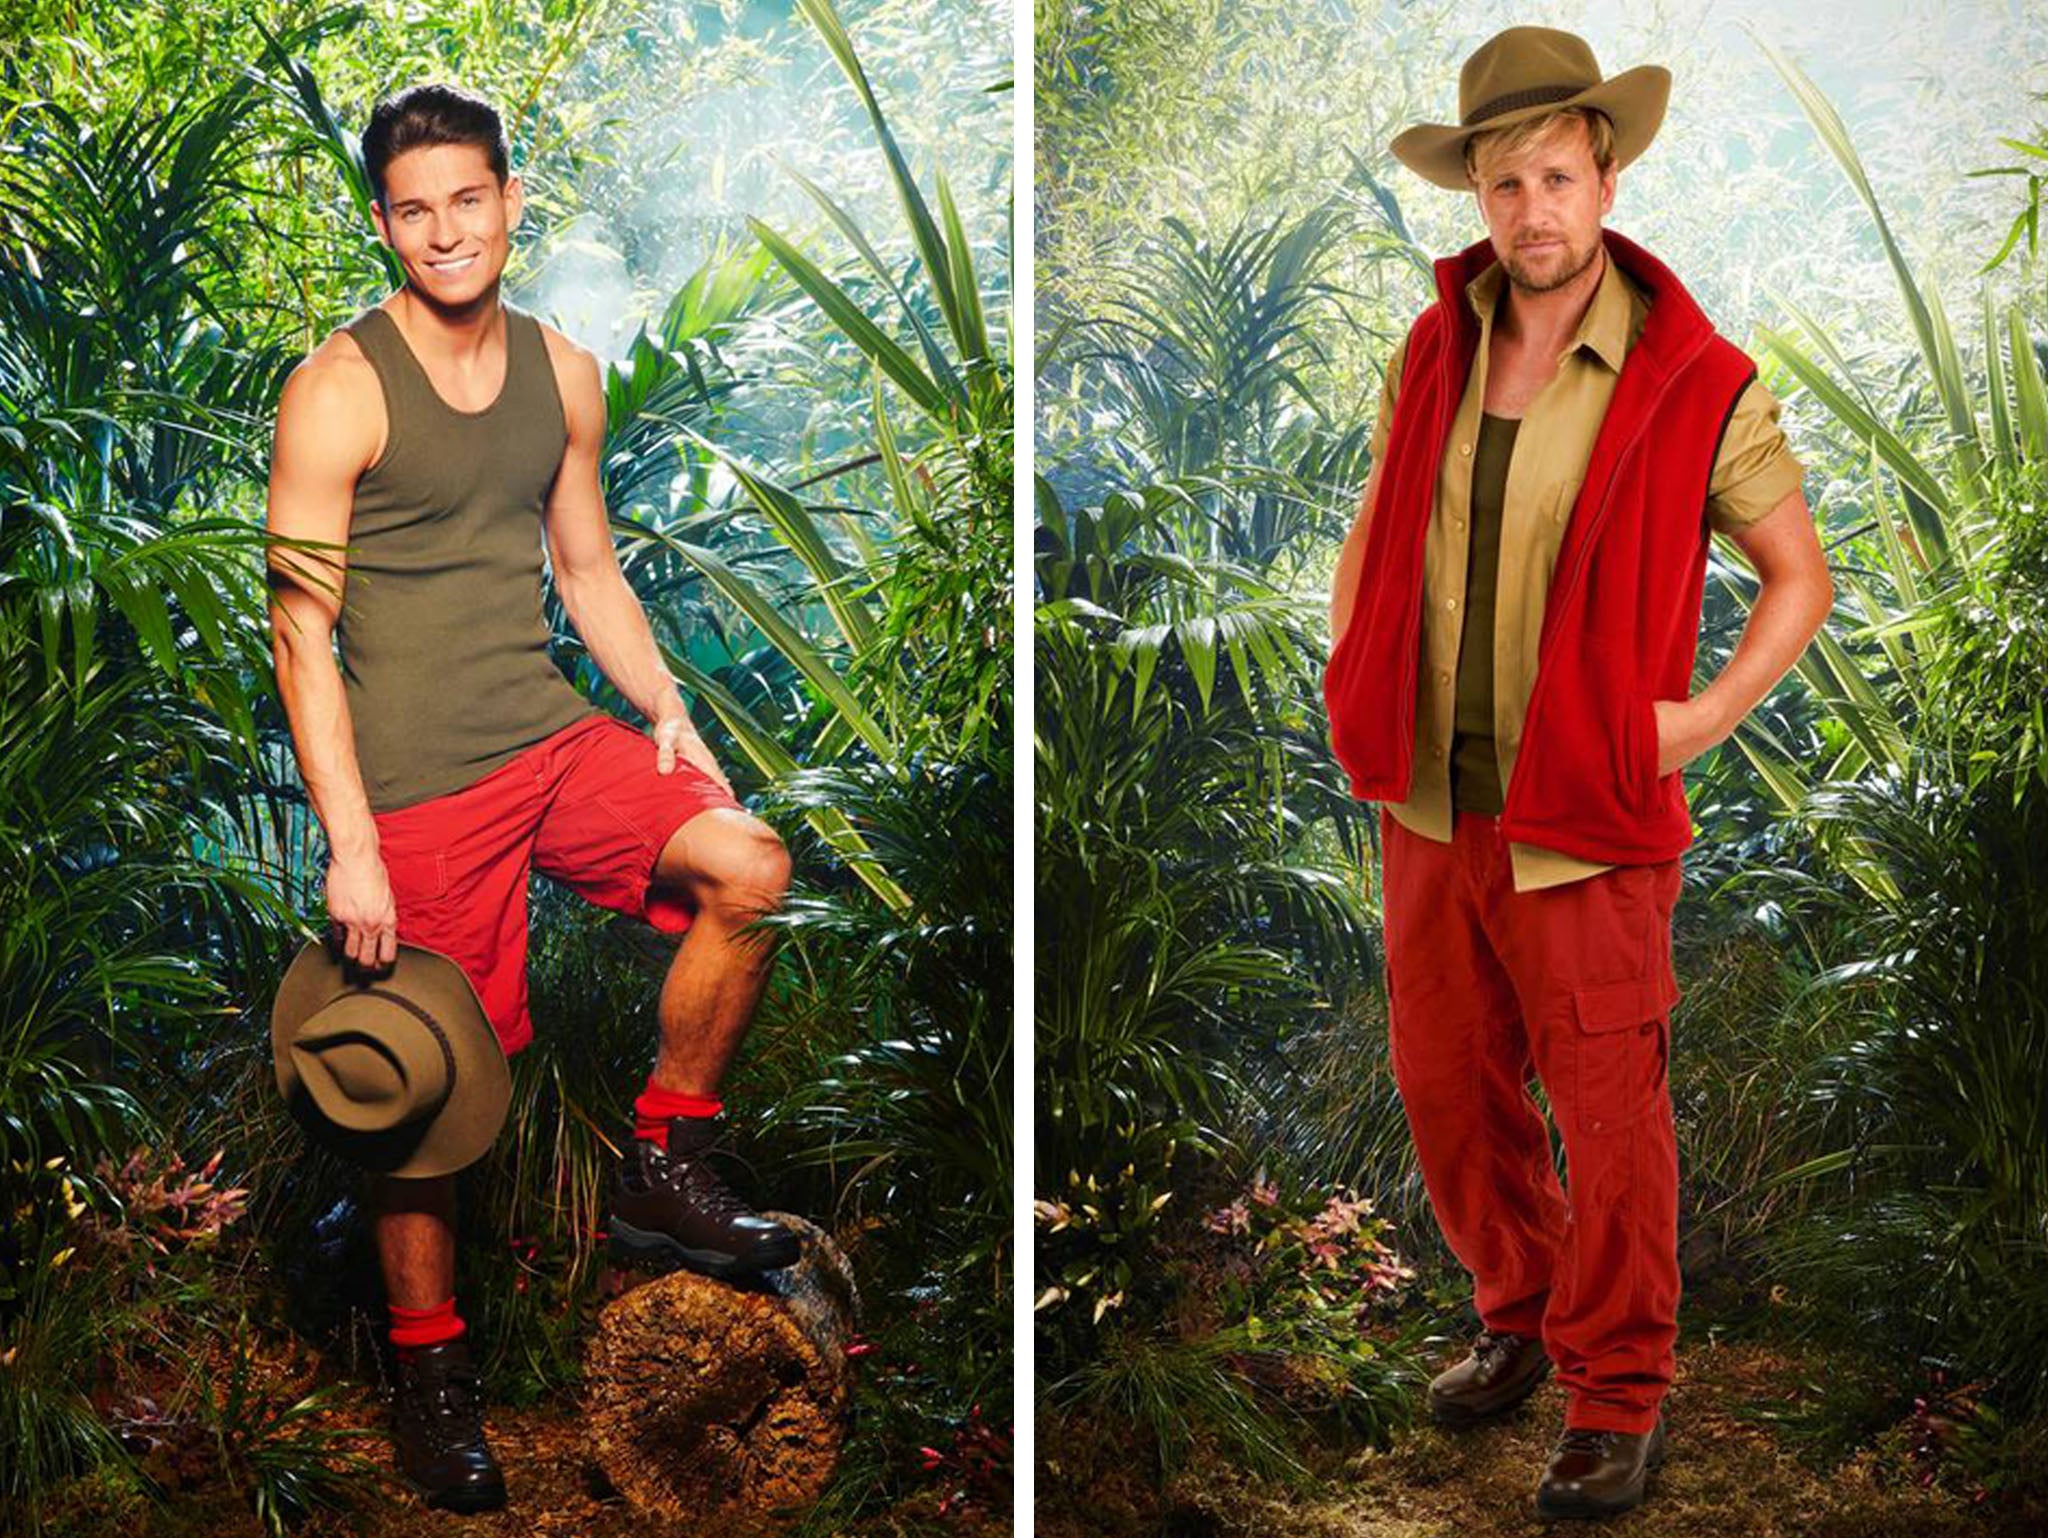 Westlife's Kian Egan has emerged as an early rival for Joey Essex in the battle for the I'm A Celebrity crown